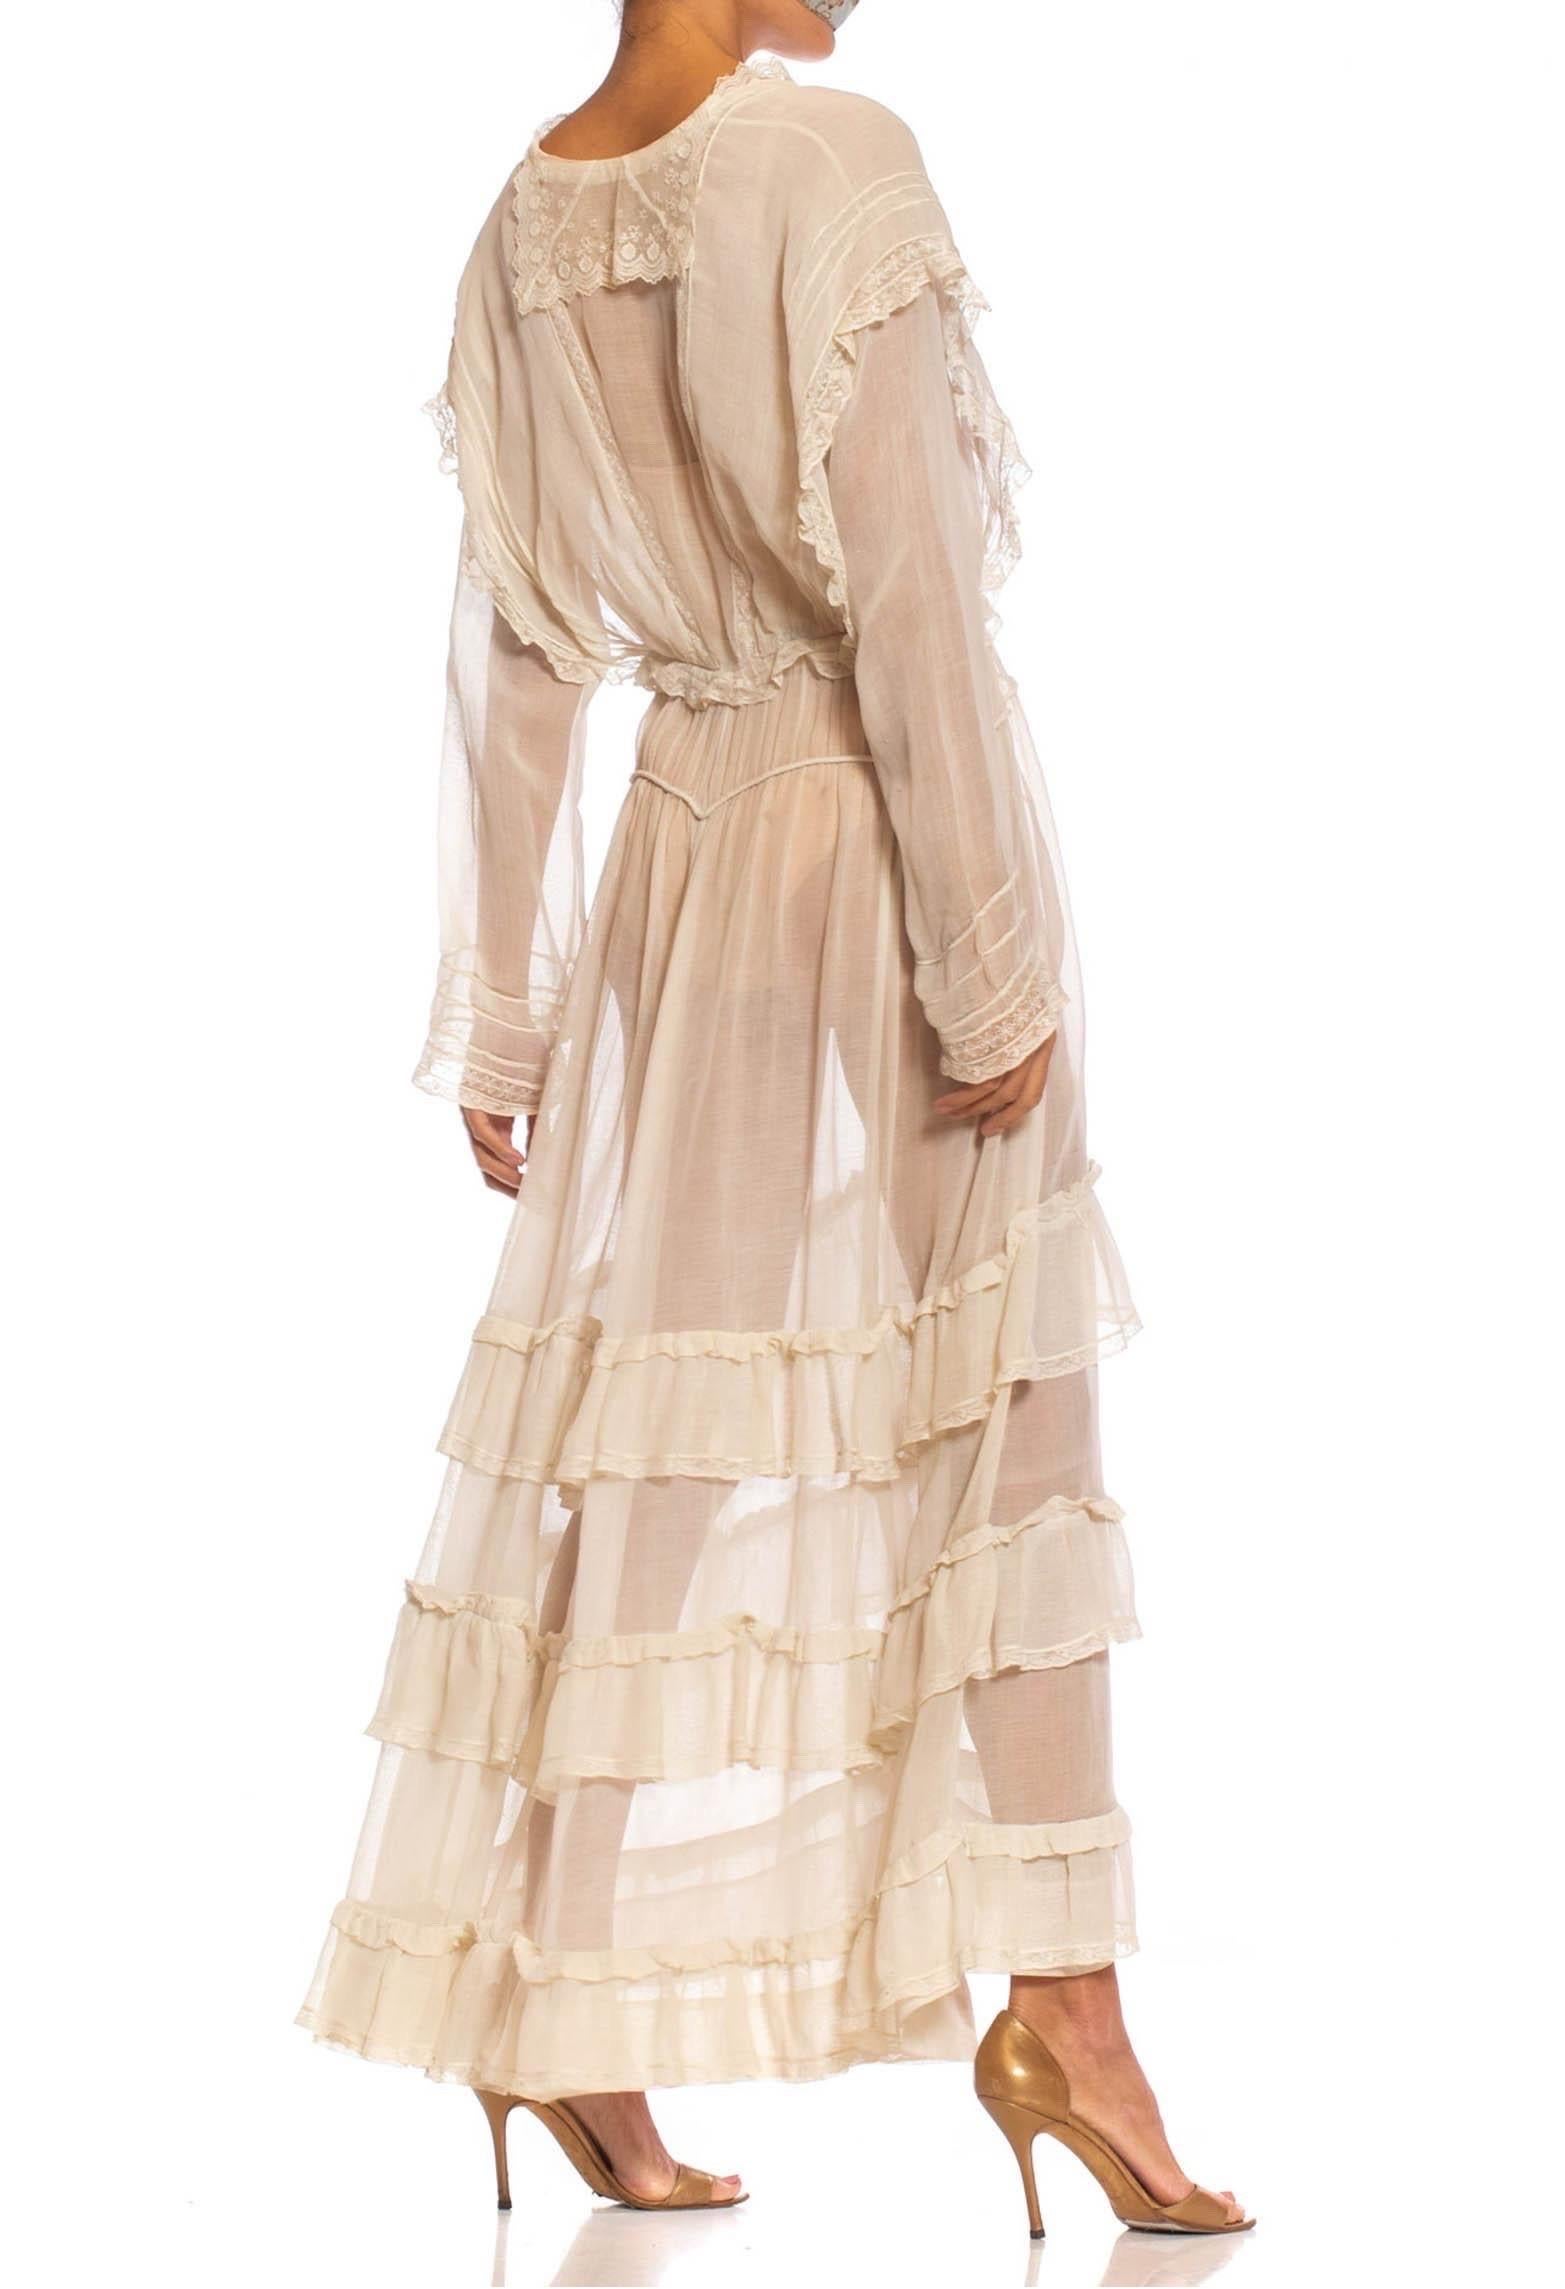 Edwardian Off White Organic Cotton Voile & Lace Long Sleeved Ruffled Tea Dress For Sale 2